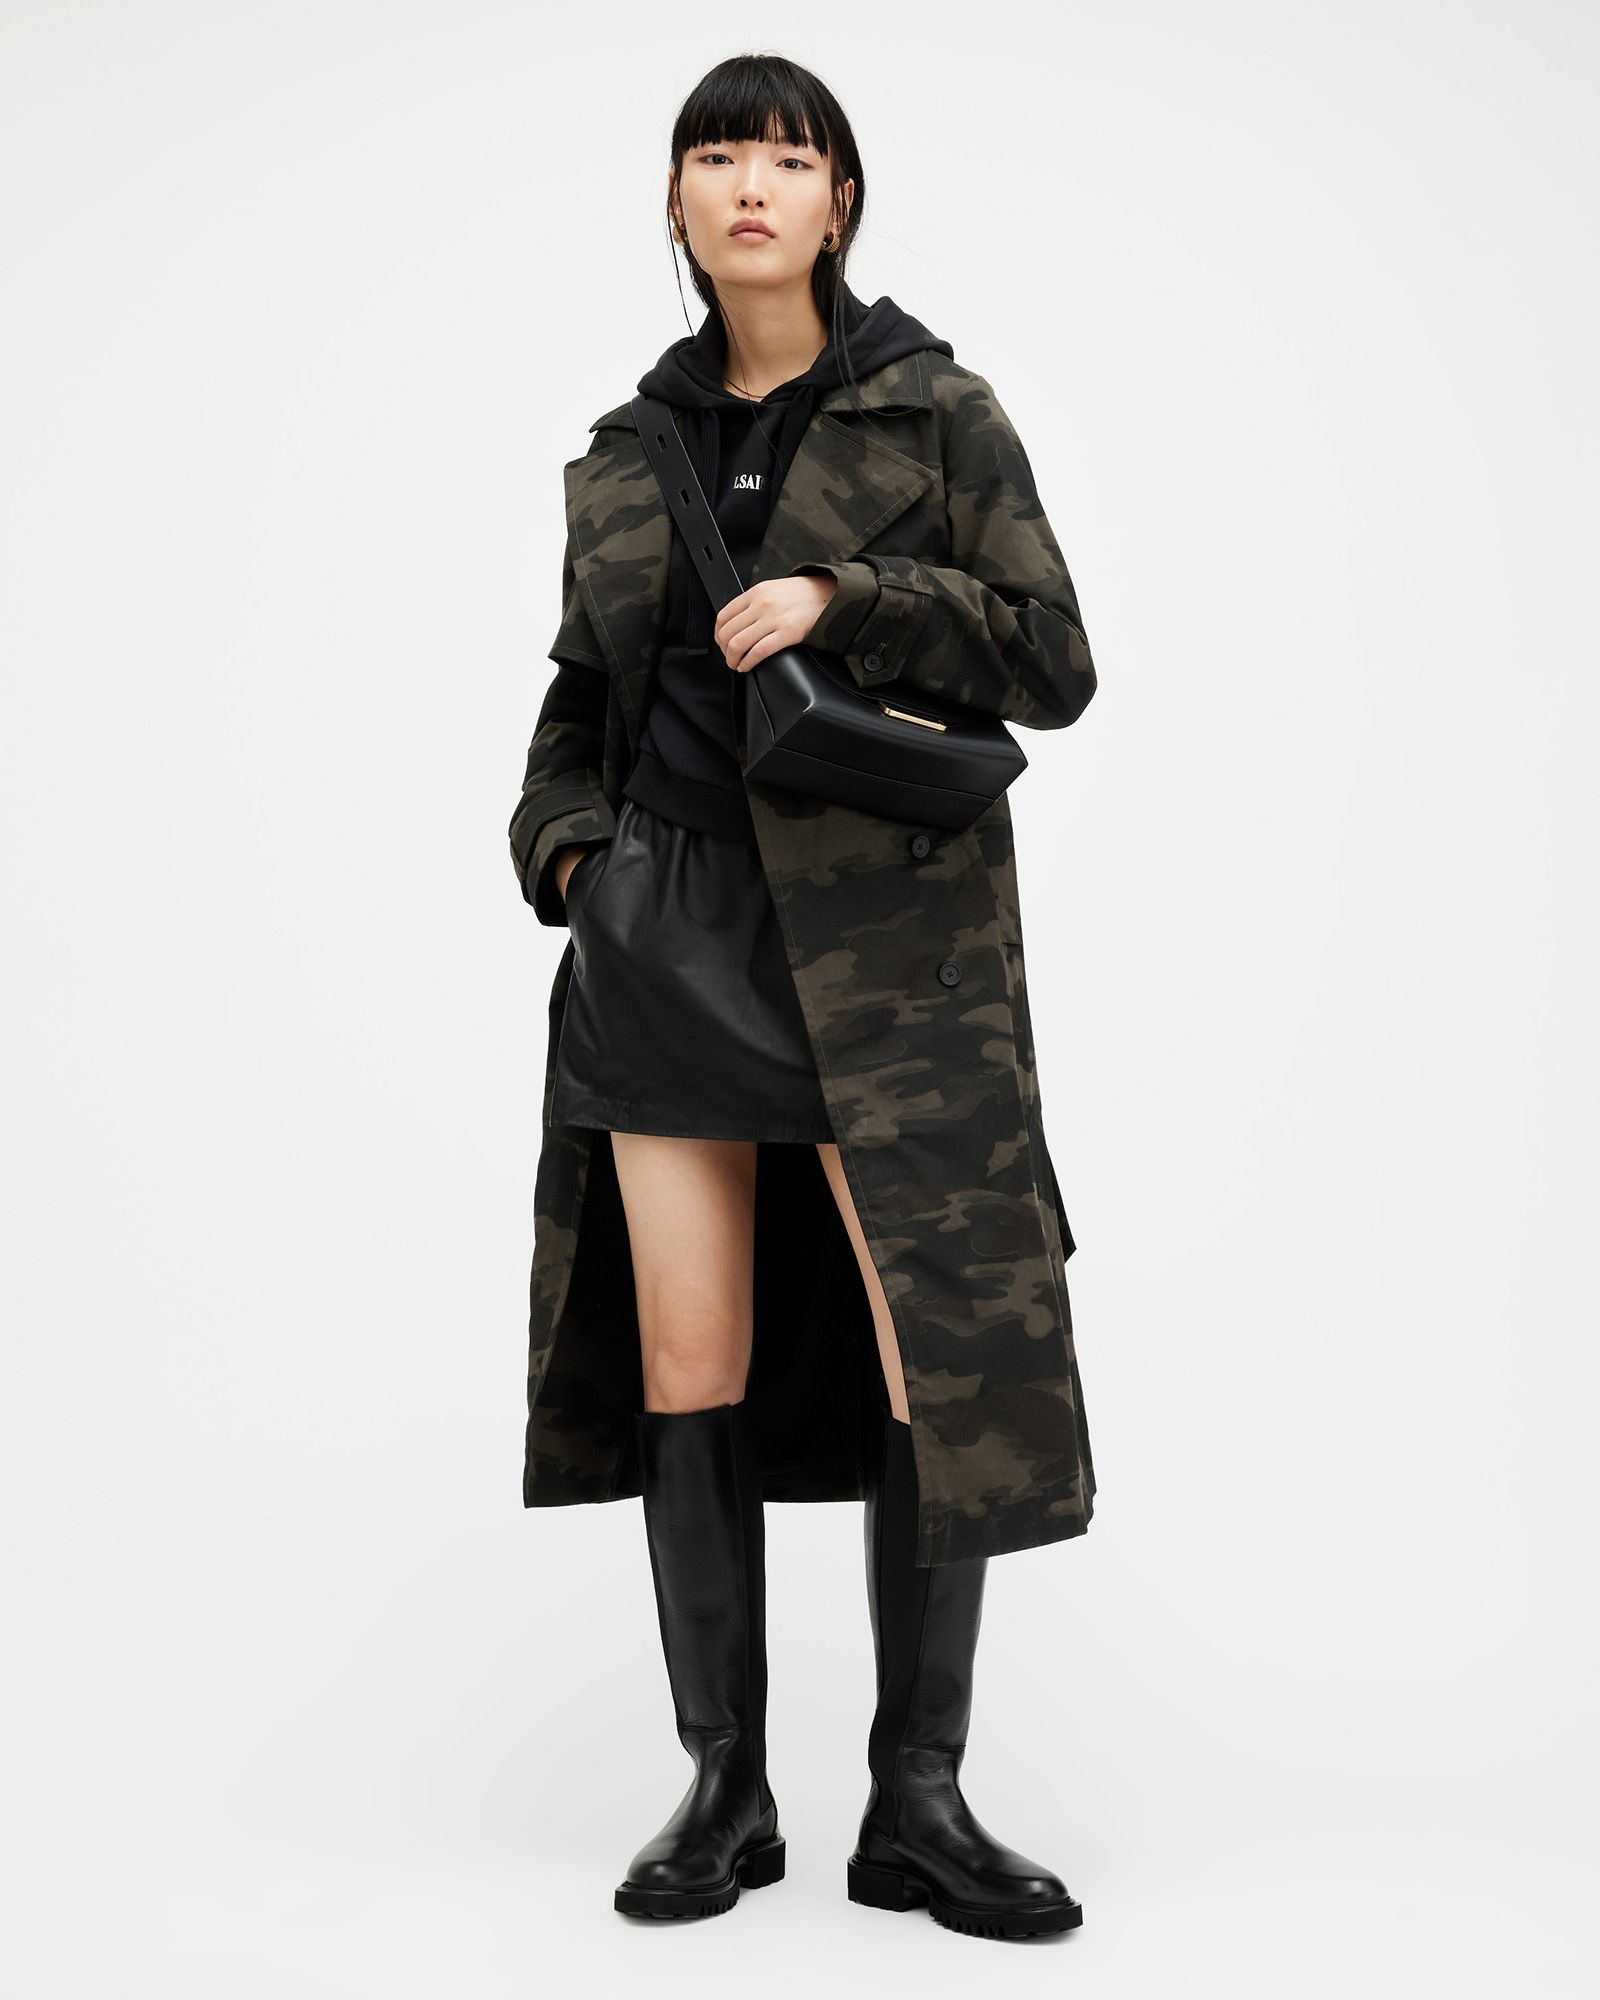 AllSaints Mixie Camouflage Relaxed Fit Trench Coat,, CAMO BROWN